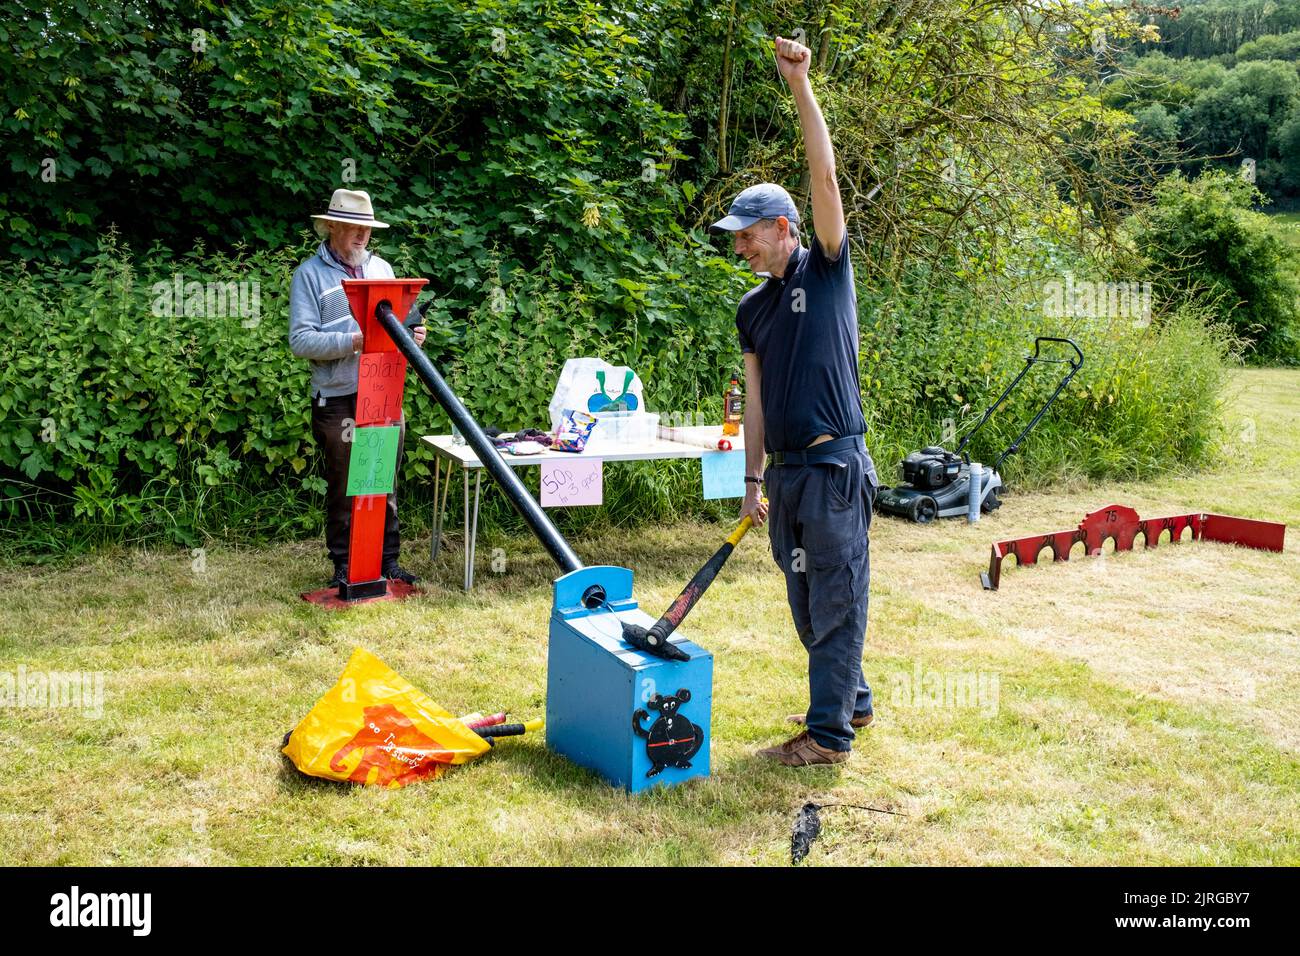 A Local Man Plays The Traditional Game Of Splat The Rat At The Annual Poynings Fete, Poynings, East Sussex, UK. Stock Photo